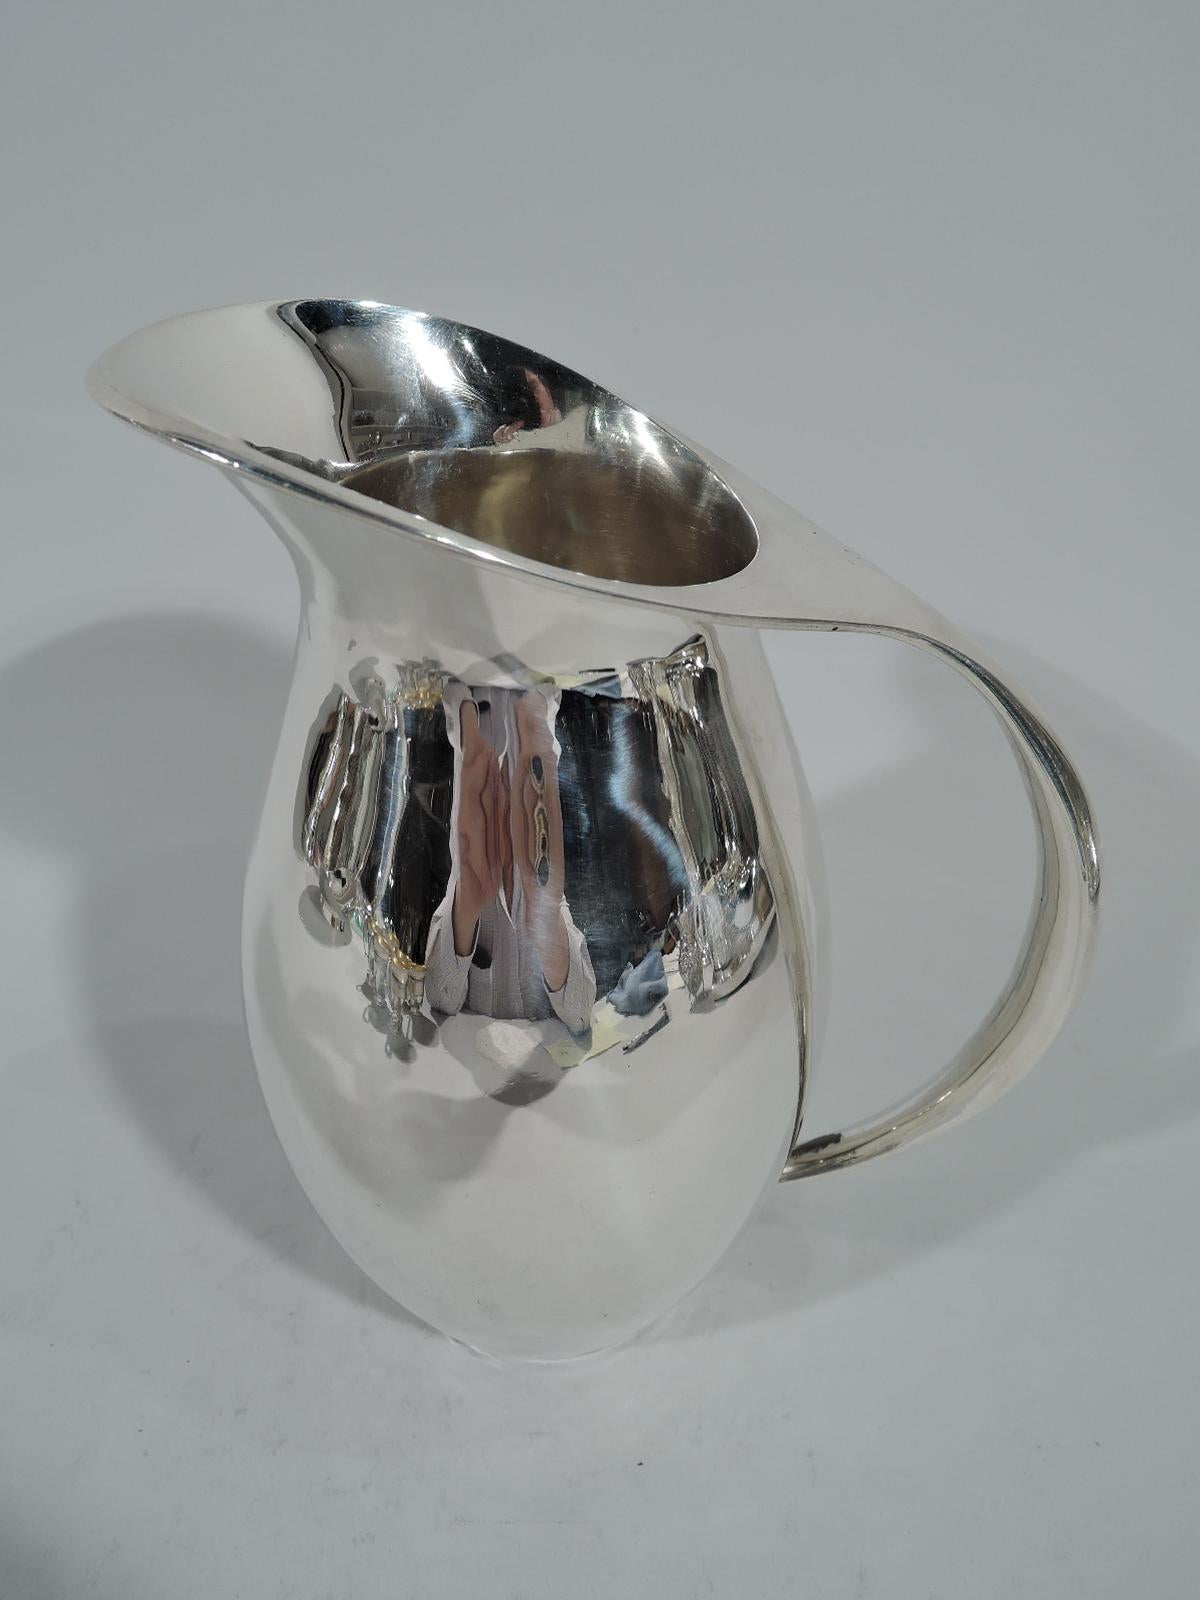 Mid-Century Modern sterling silver water pitcher. Classic form comprising ovoid body and asymmetrical mouth flowing into a sleekly tapering scroll handle. Mexican hallmark and maker’s stamp for Avanti, who was active from around the 1930s-1960s.